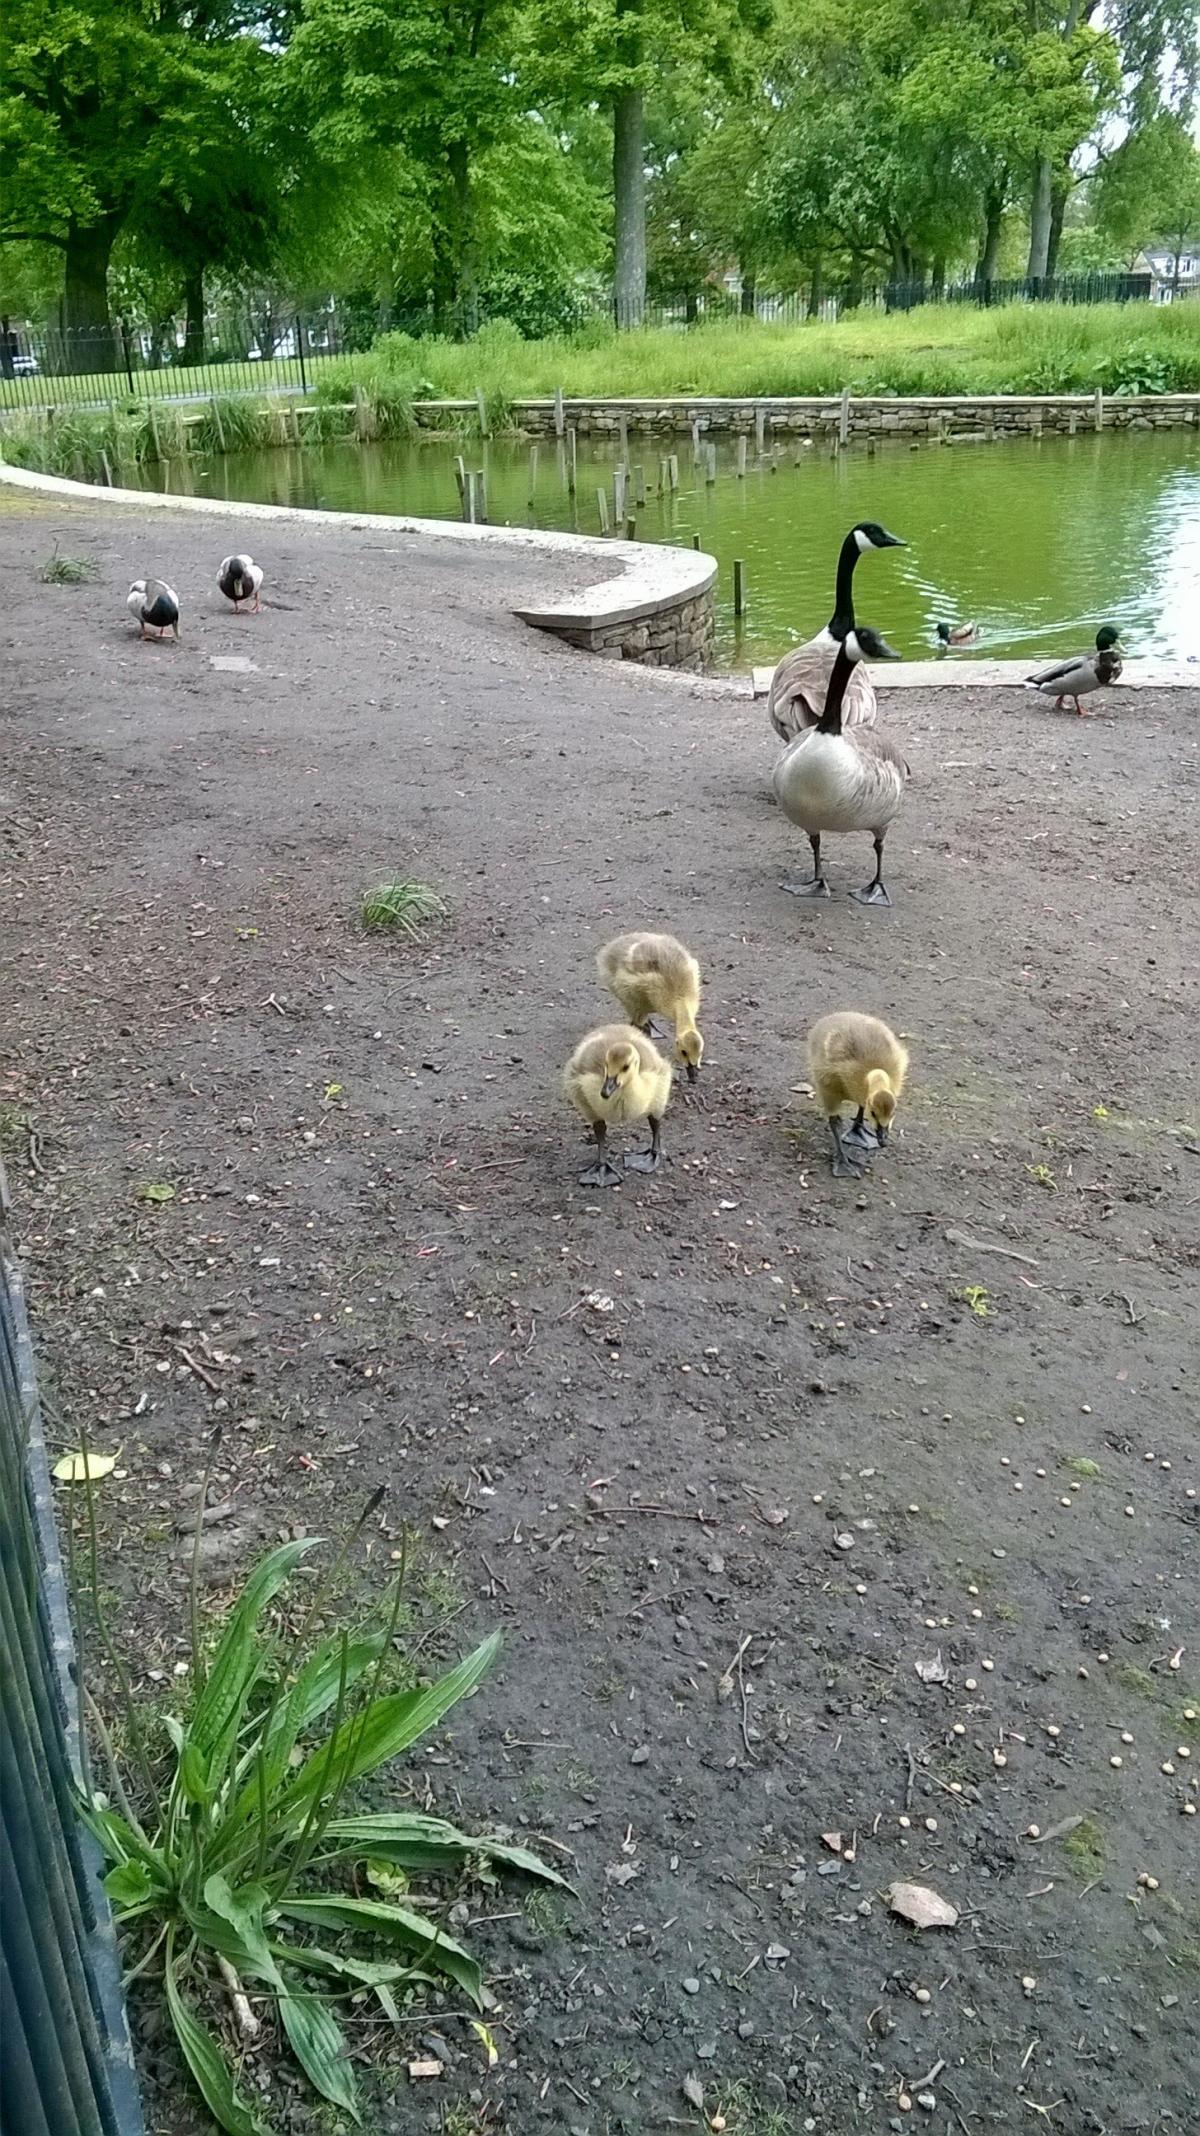 Reader Linda Cole sent in this lovely snap of a Canada goose and her goslings in Victoria Park.